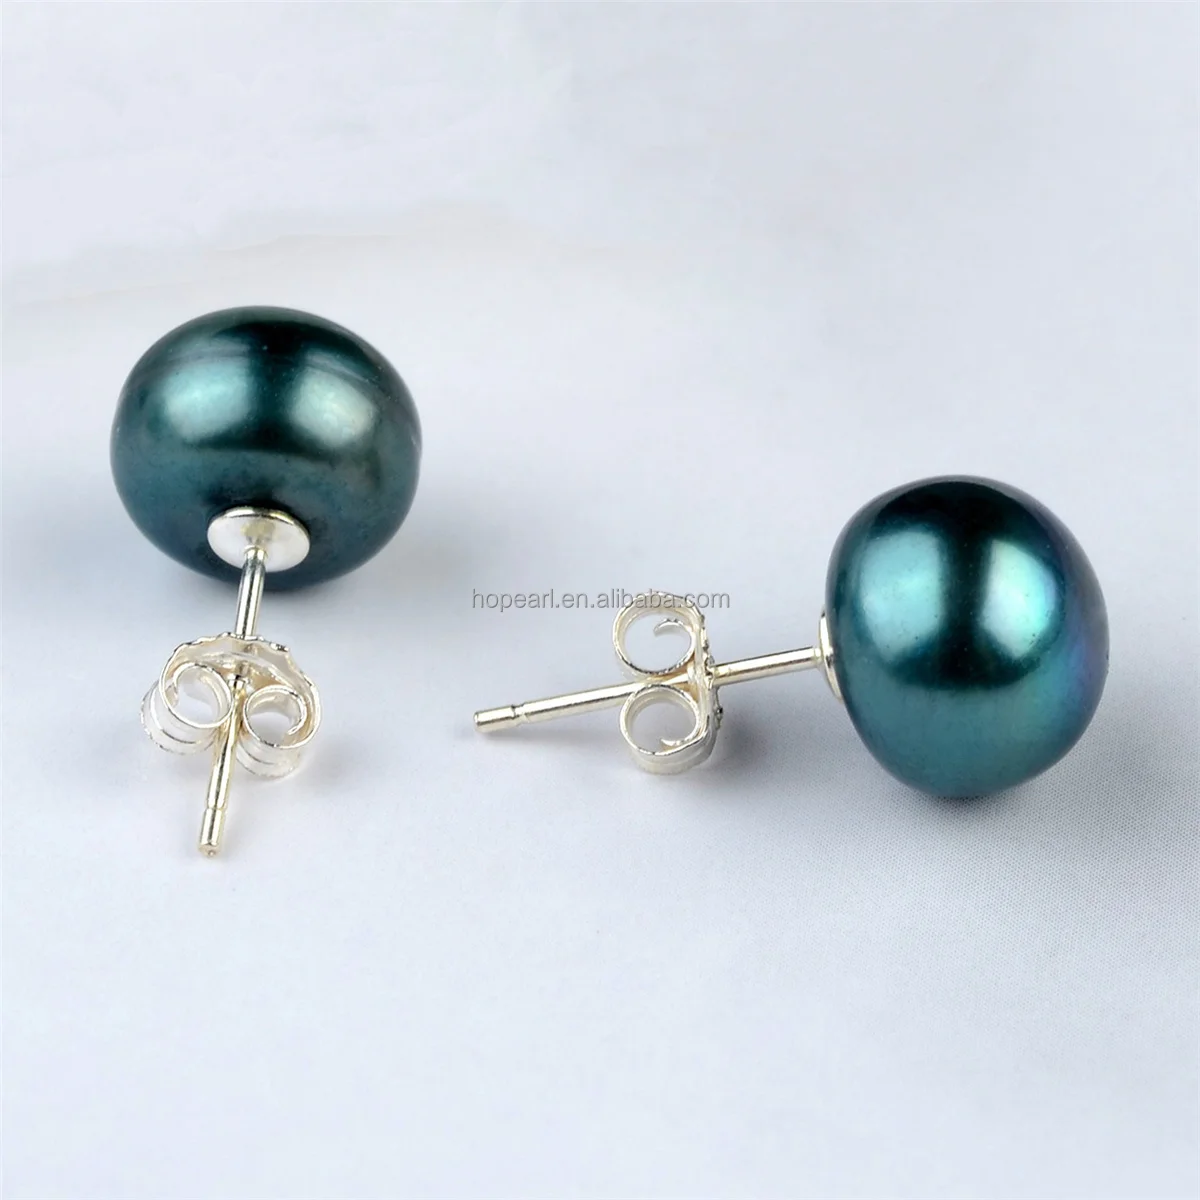 

FPE256 Button Shape Peacock Green and Blue Colors 8-9mm Freshwater Pearl 925 Silver Studs Simple Earrings